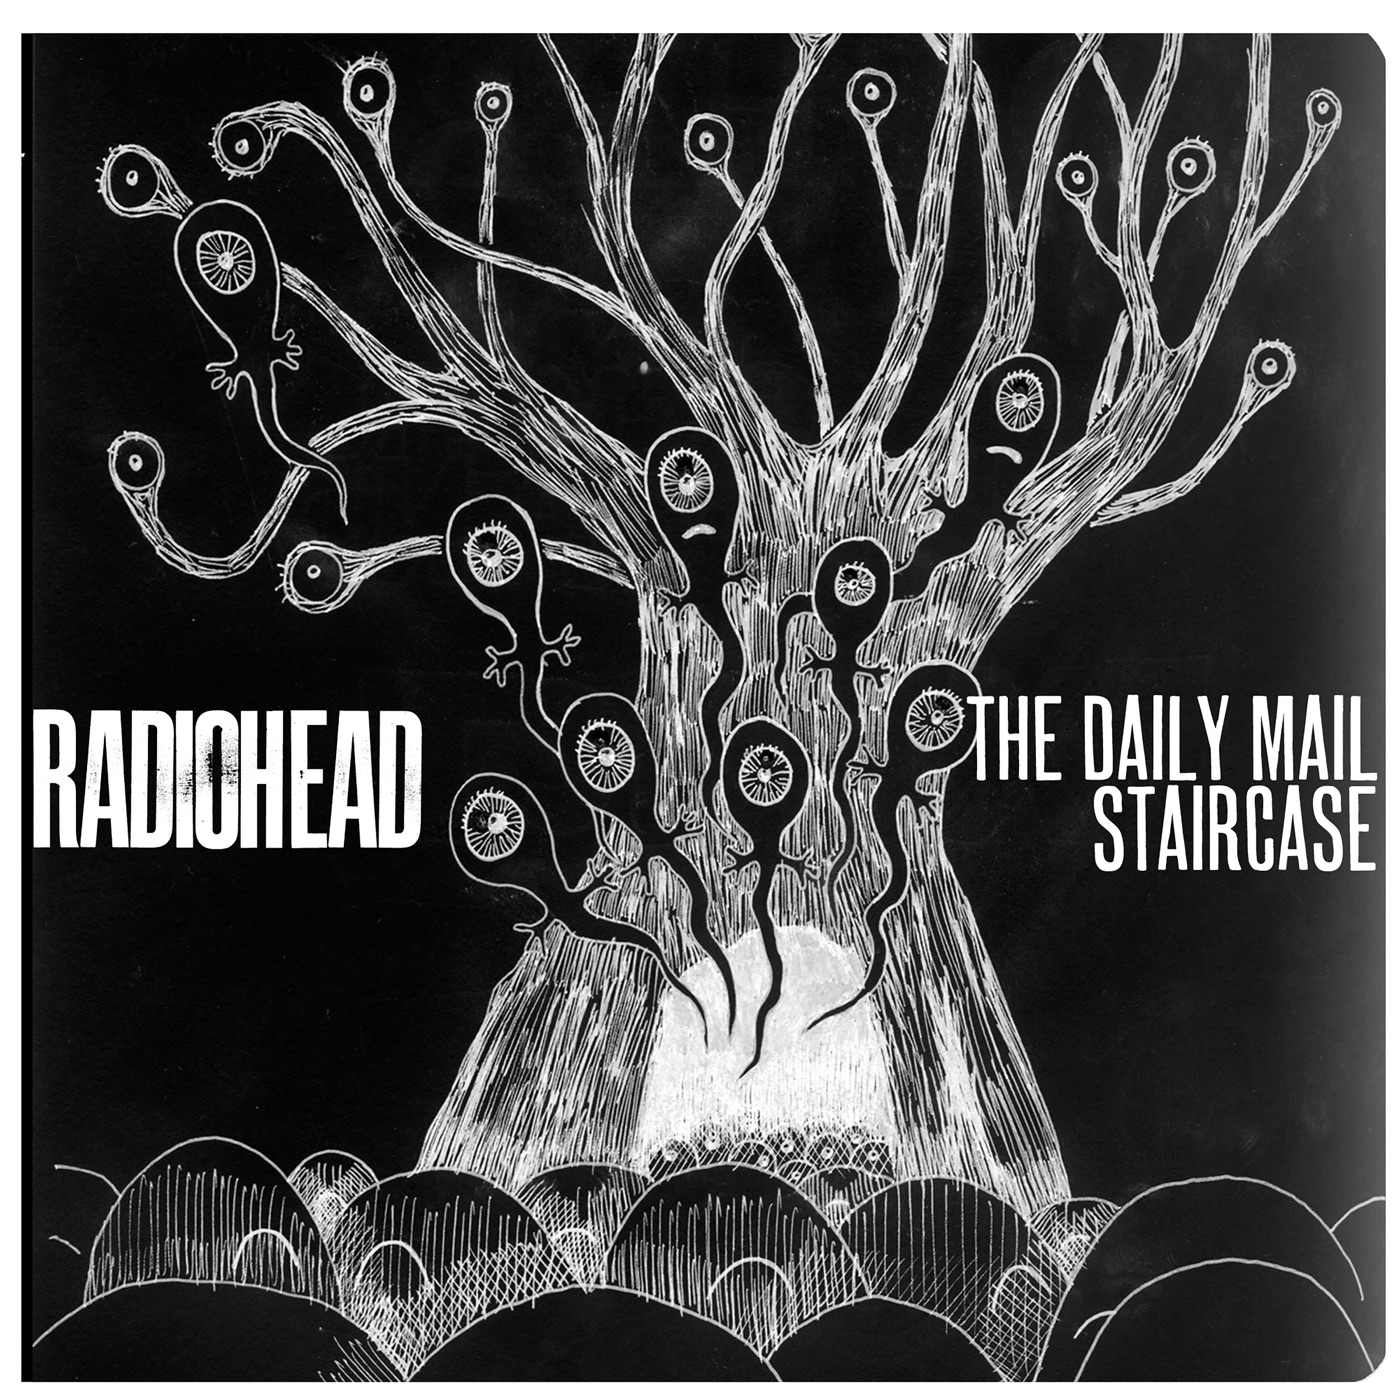 The Daily Mail / Staircase by Radiohead